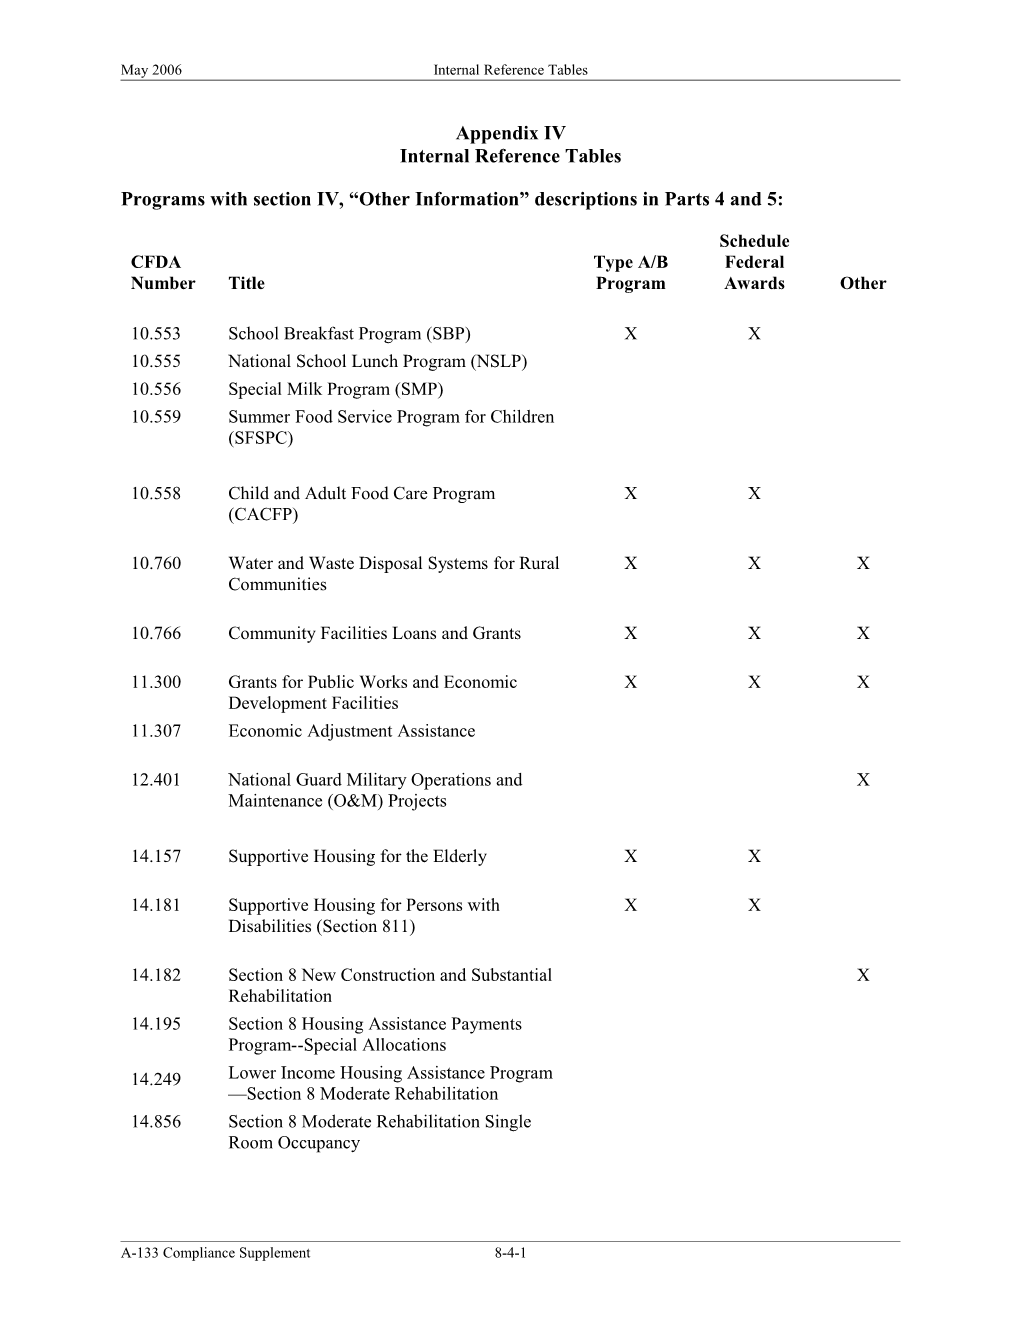 Programs with Section IV, Other Information Descriptions in Parts 4 and 5